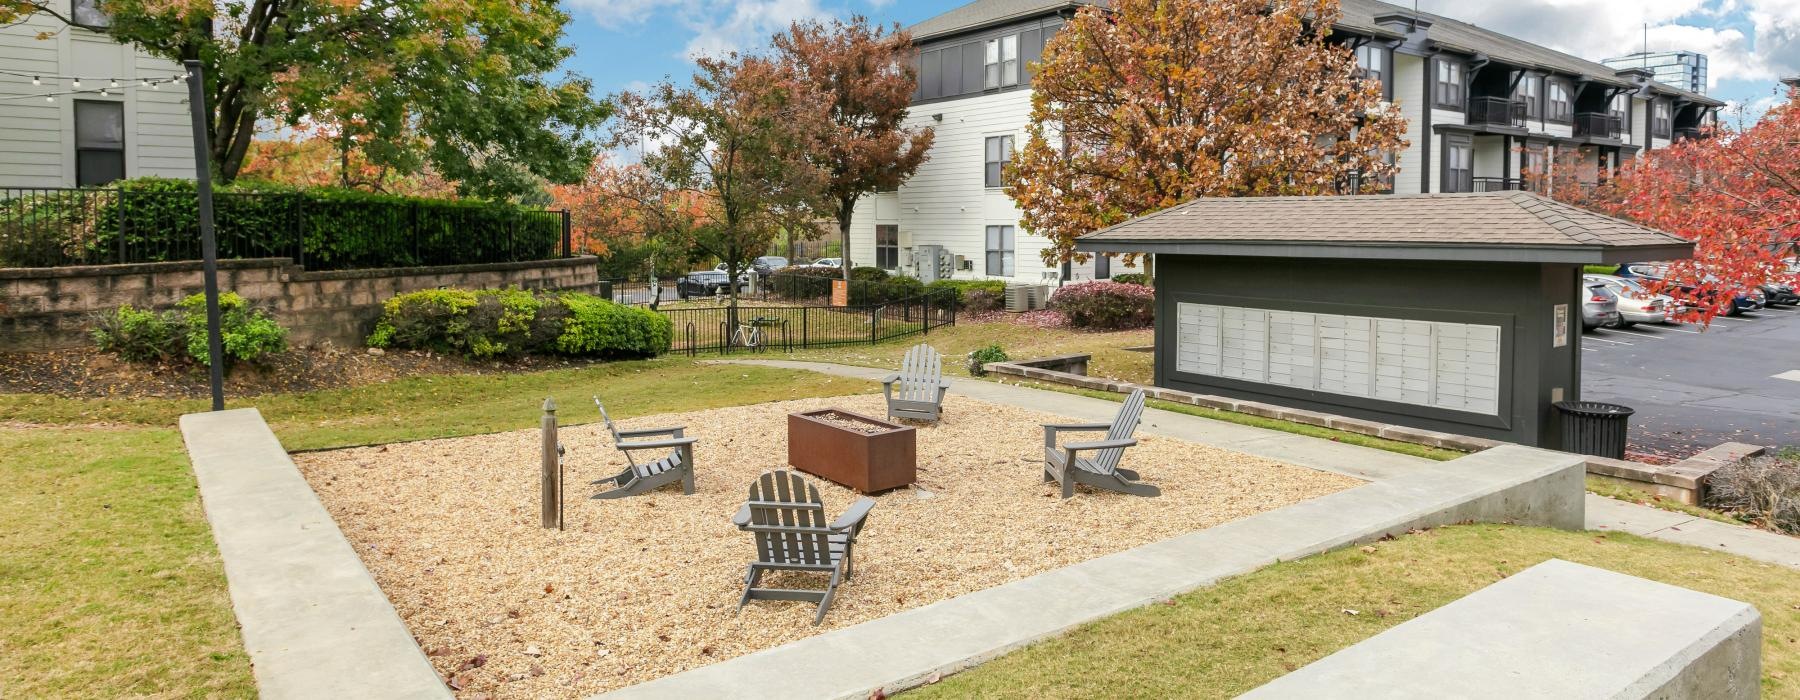 sand filled square with fire pit and lawn chairs adjacent to mail boxes